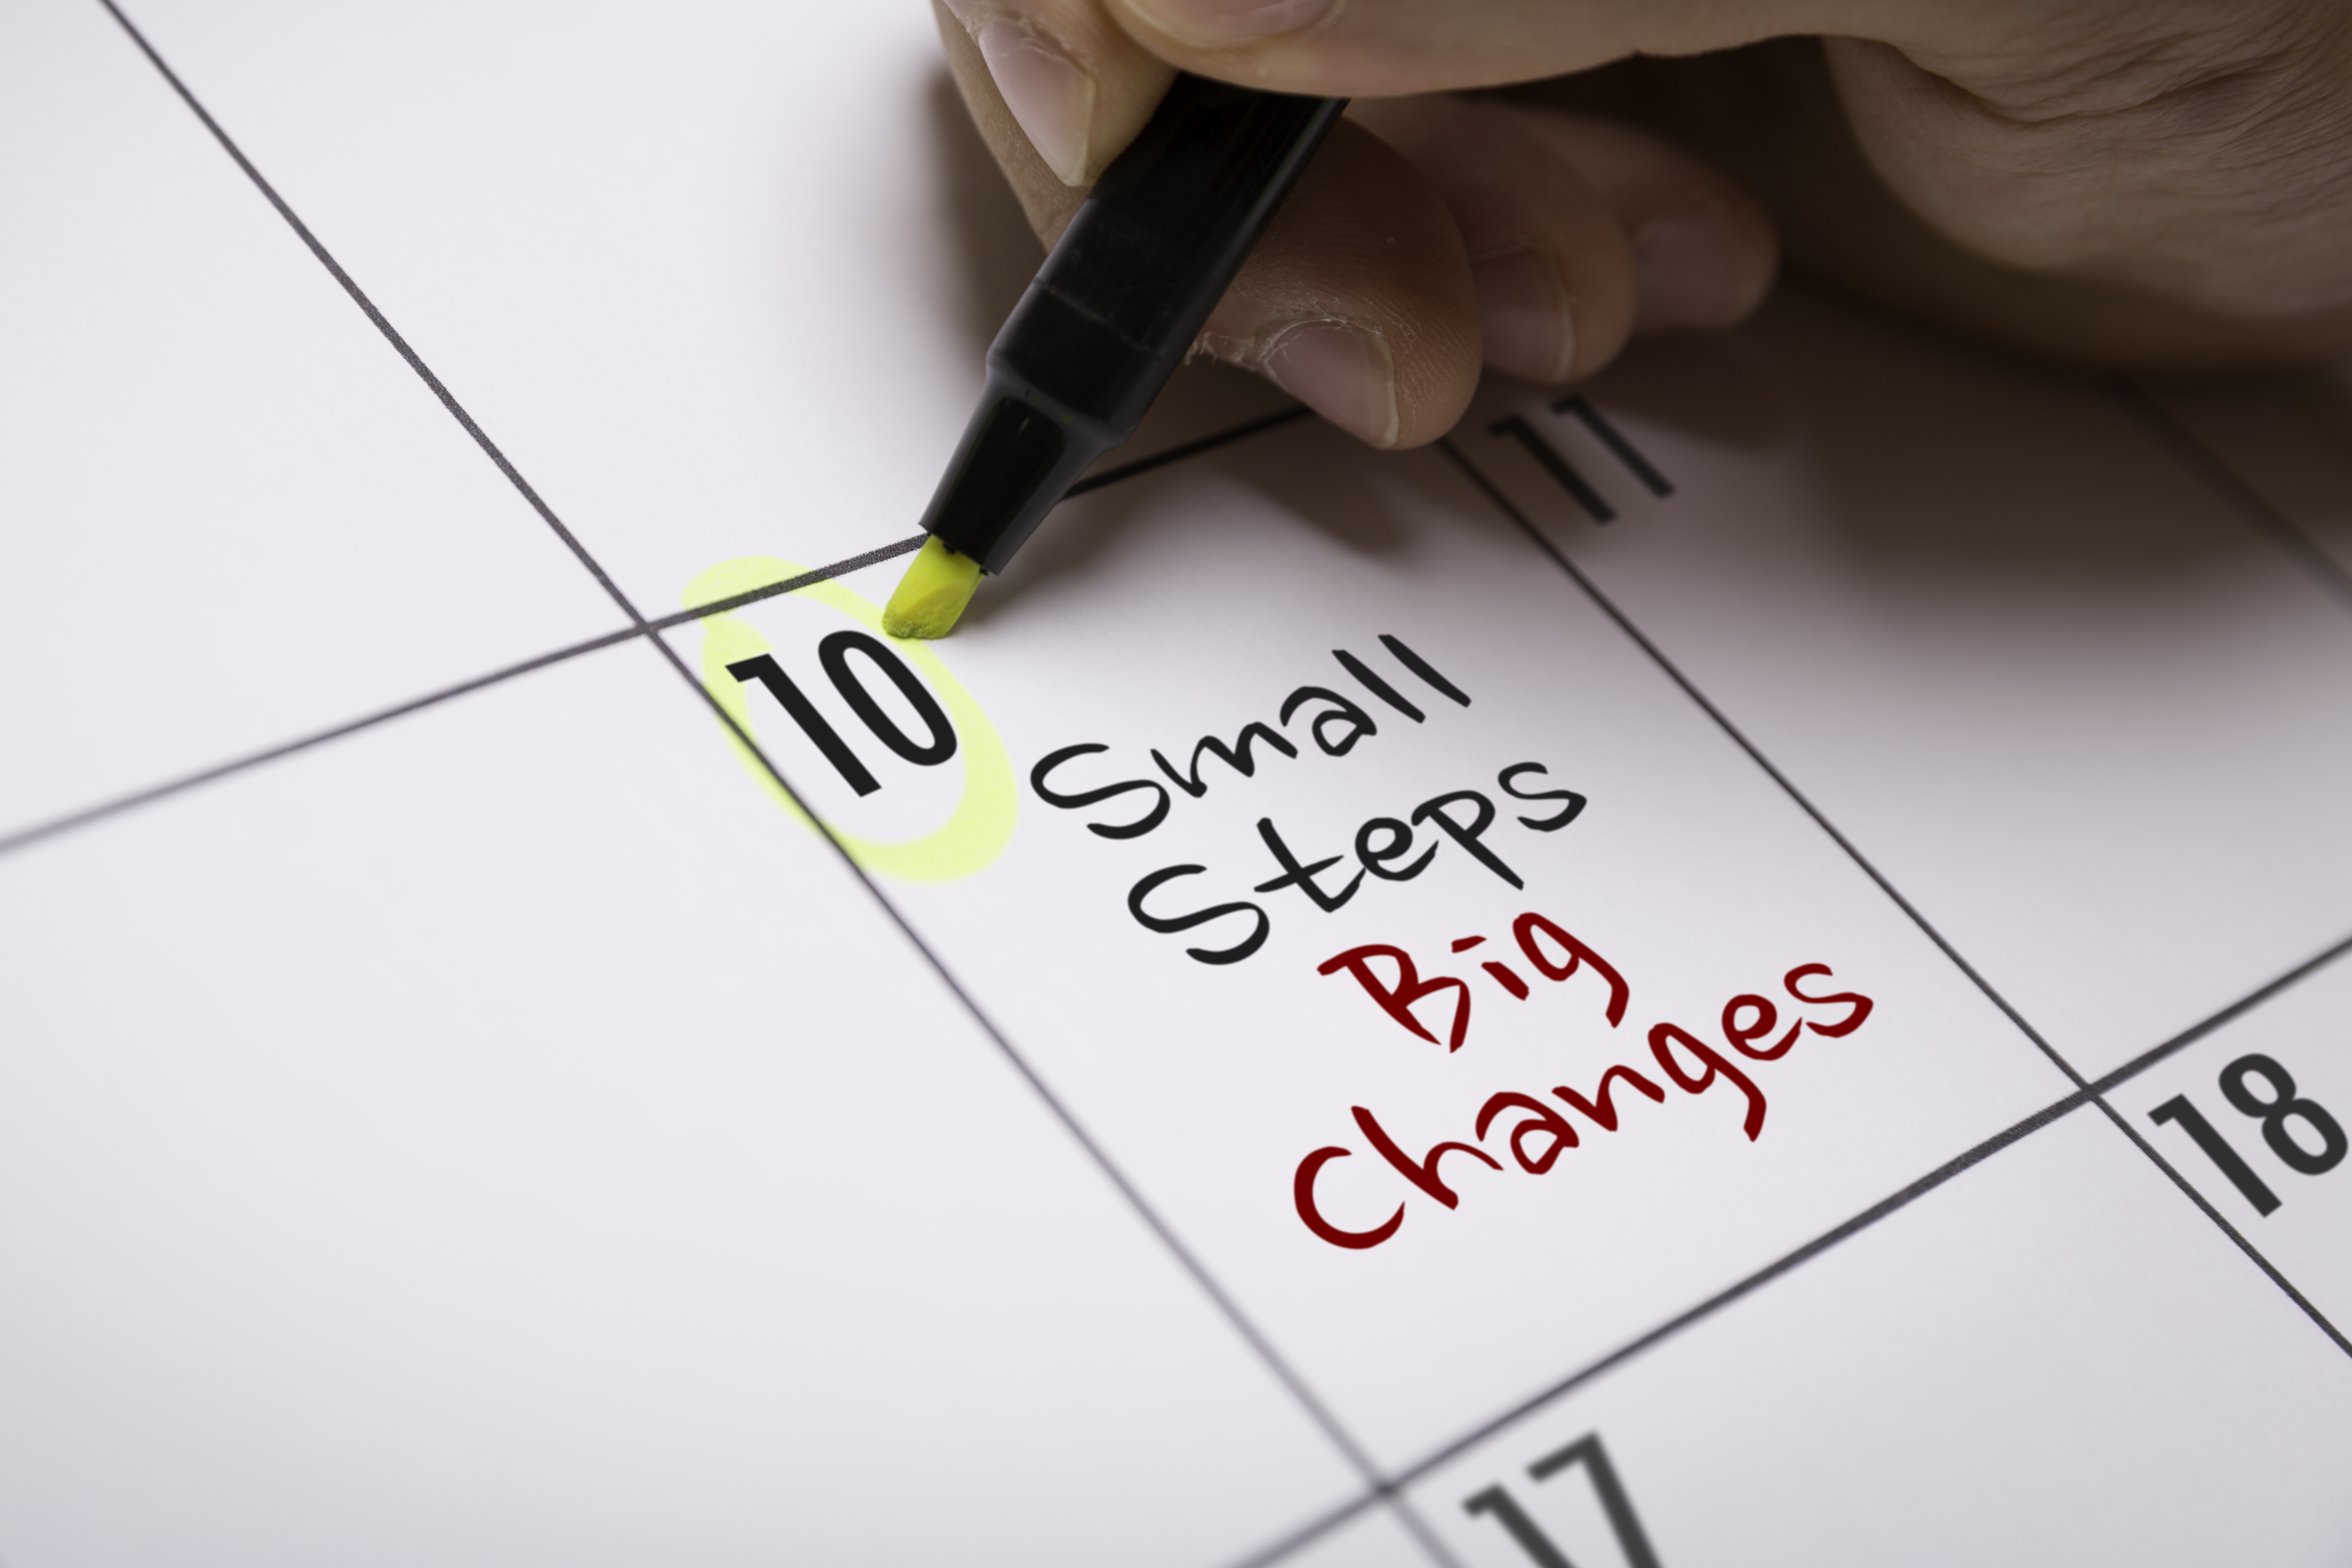 Close-up of a hand writing on a calendar the words "Small Steps Big Changes"